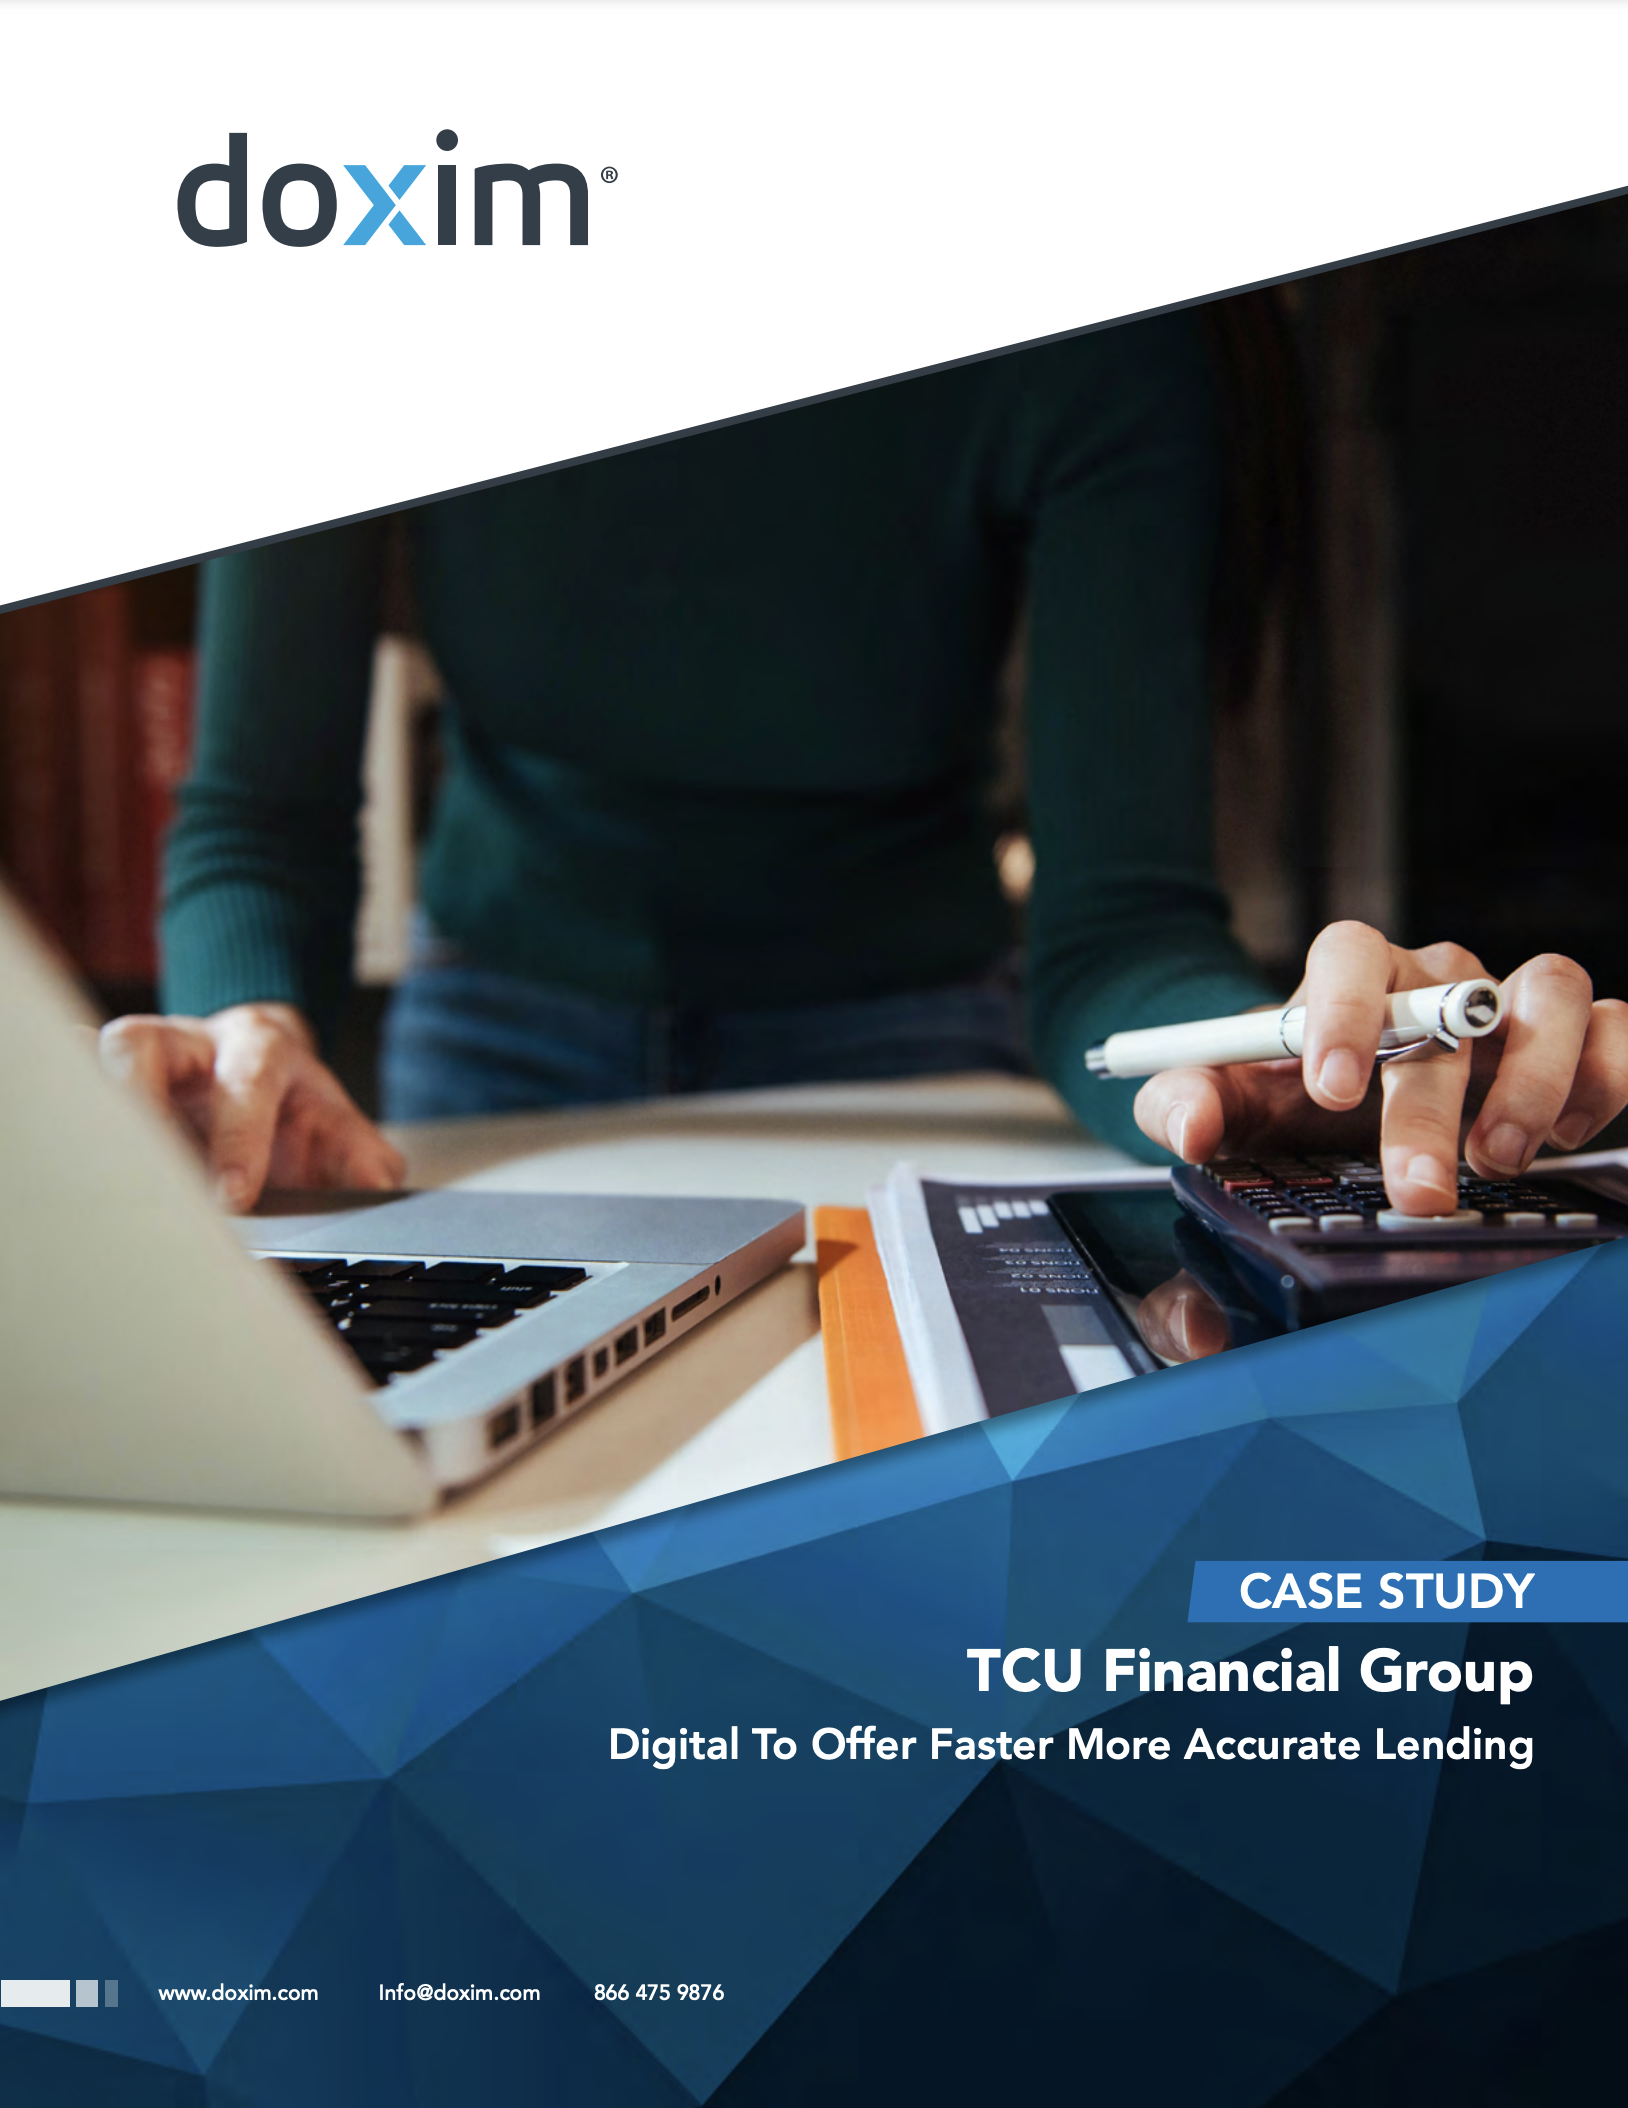 case study: TCU Financial Group Digital To Offer Faster More Accurate Lending